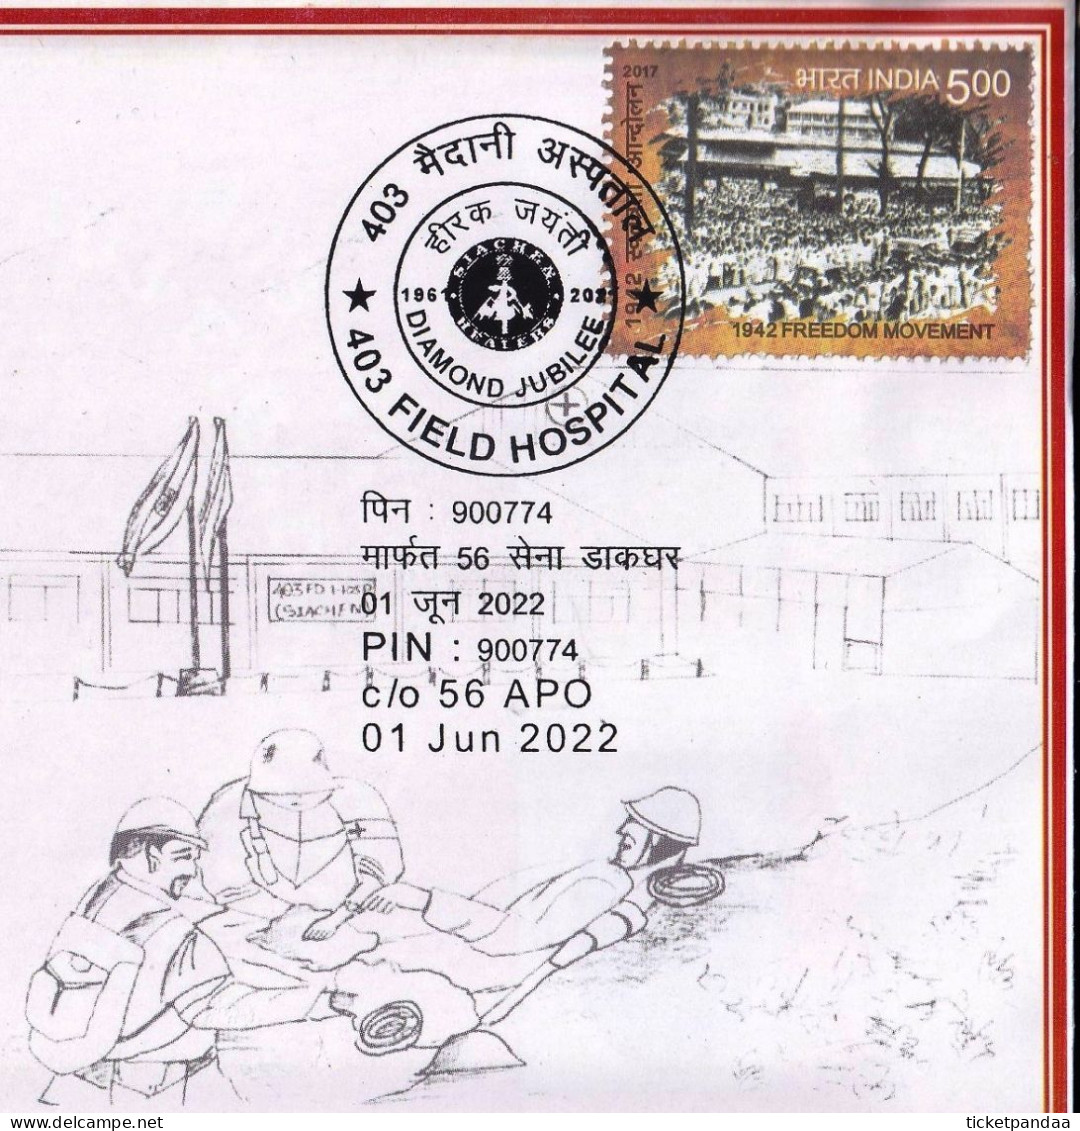 HEALTH- FIELD HOSPITALS AT SIACHEN GLACIER MOUNTAIN RANGE - PICTORIAL POSTMARK- SPECIAL COVER-INDIA-BX4-31 - First Aid